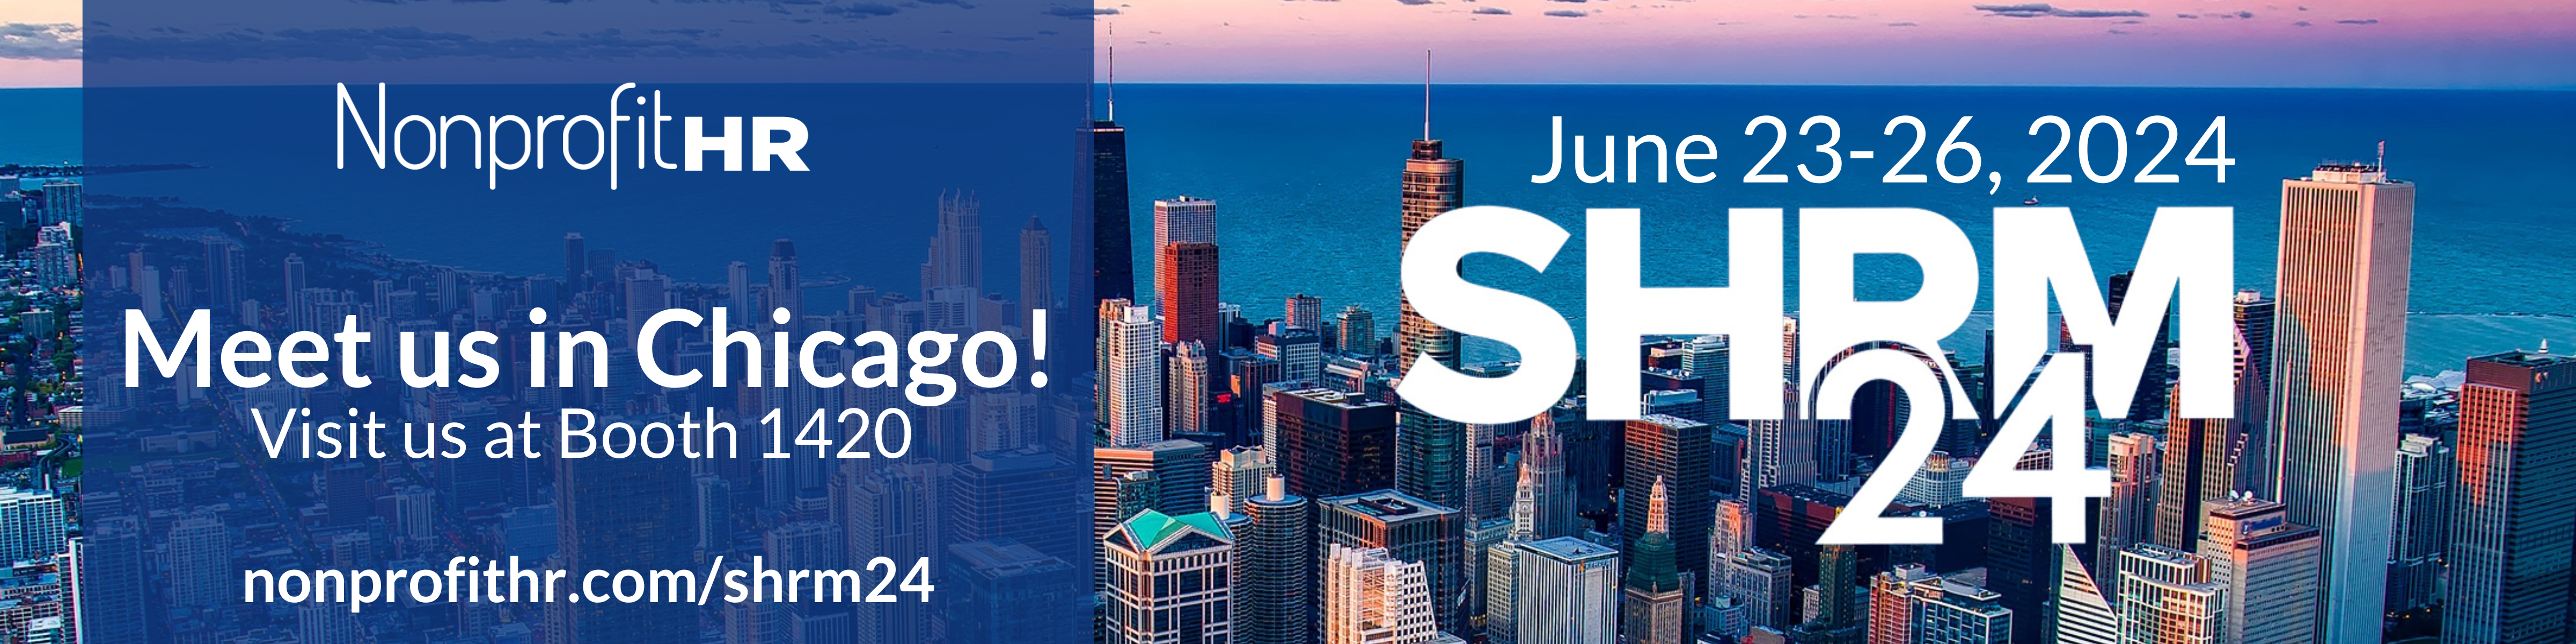 Banner with Chicago photo background with text "Meet us in Chicago! Visit us at Booth 1420."